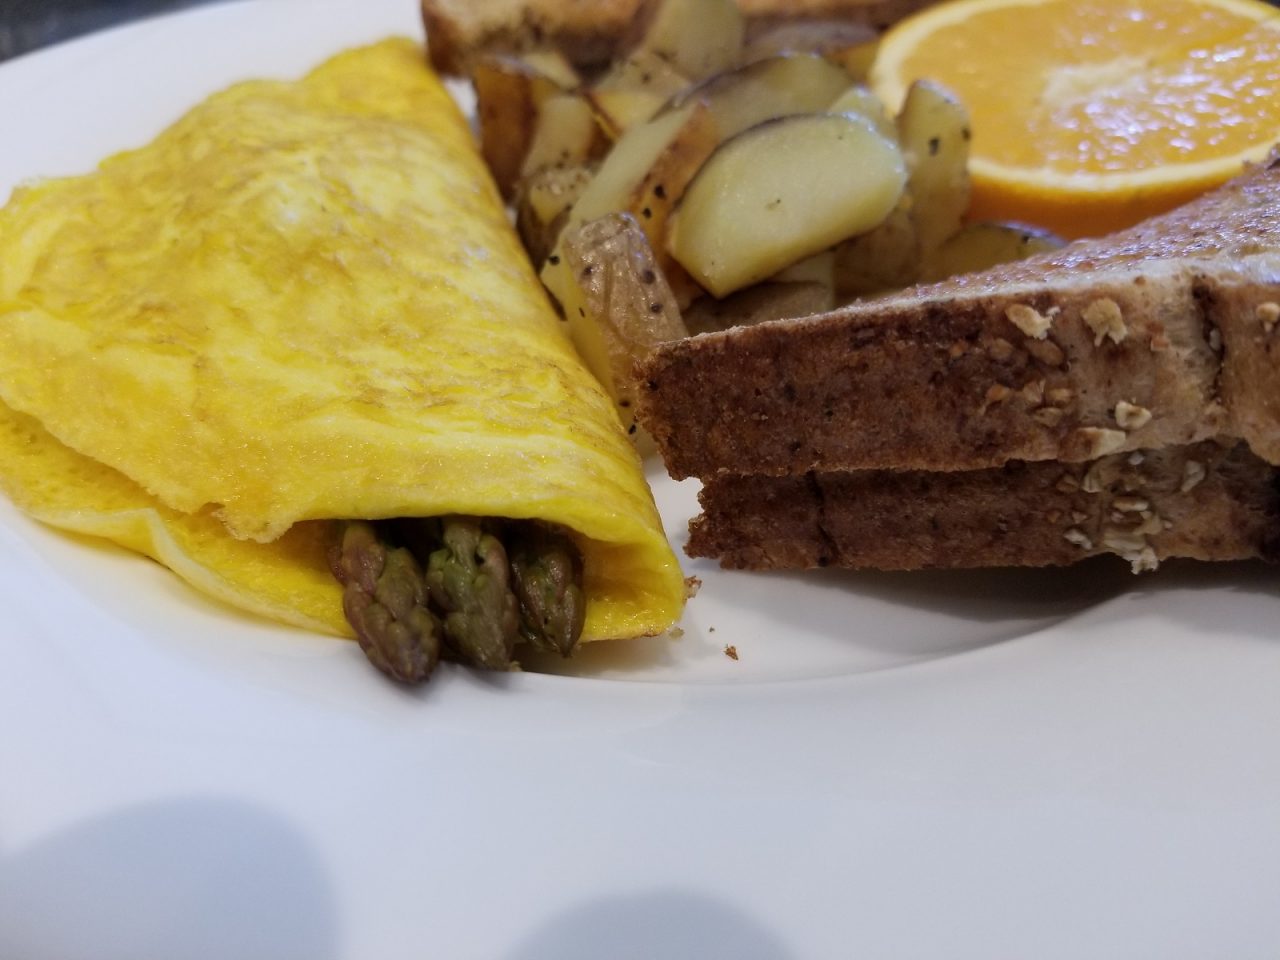 Choose from 3 unique 2 egg omelets on the daily breakfast menu.